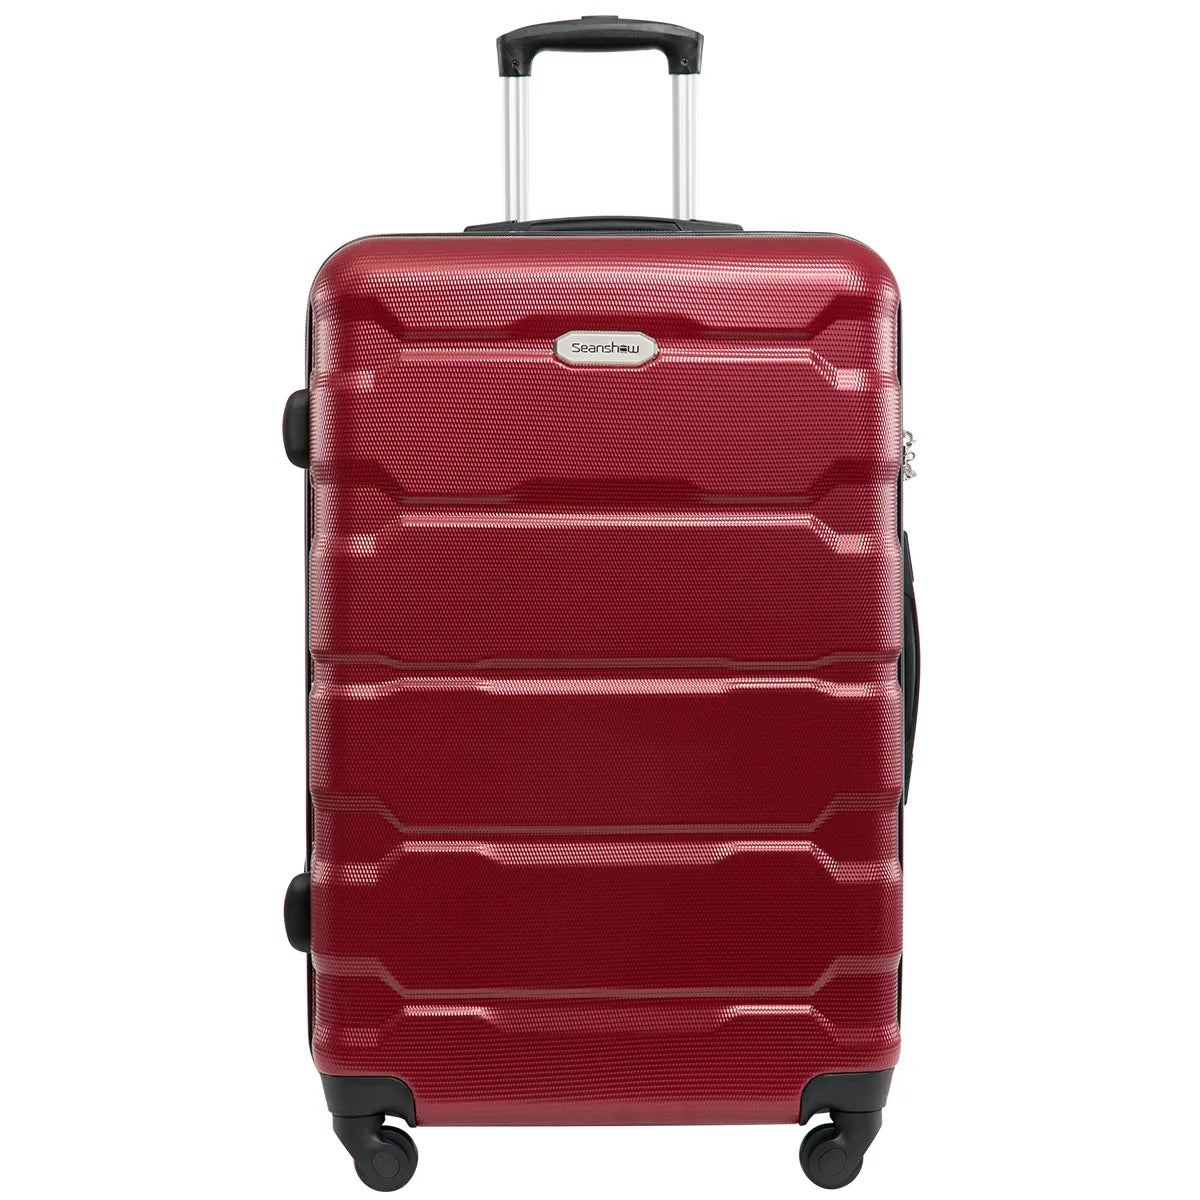 18carry on Cabin suitcase 22/26/30 inch travel suitcase on wheelsrolling luggage set trolley luggage bag case High capacity